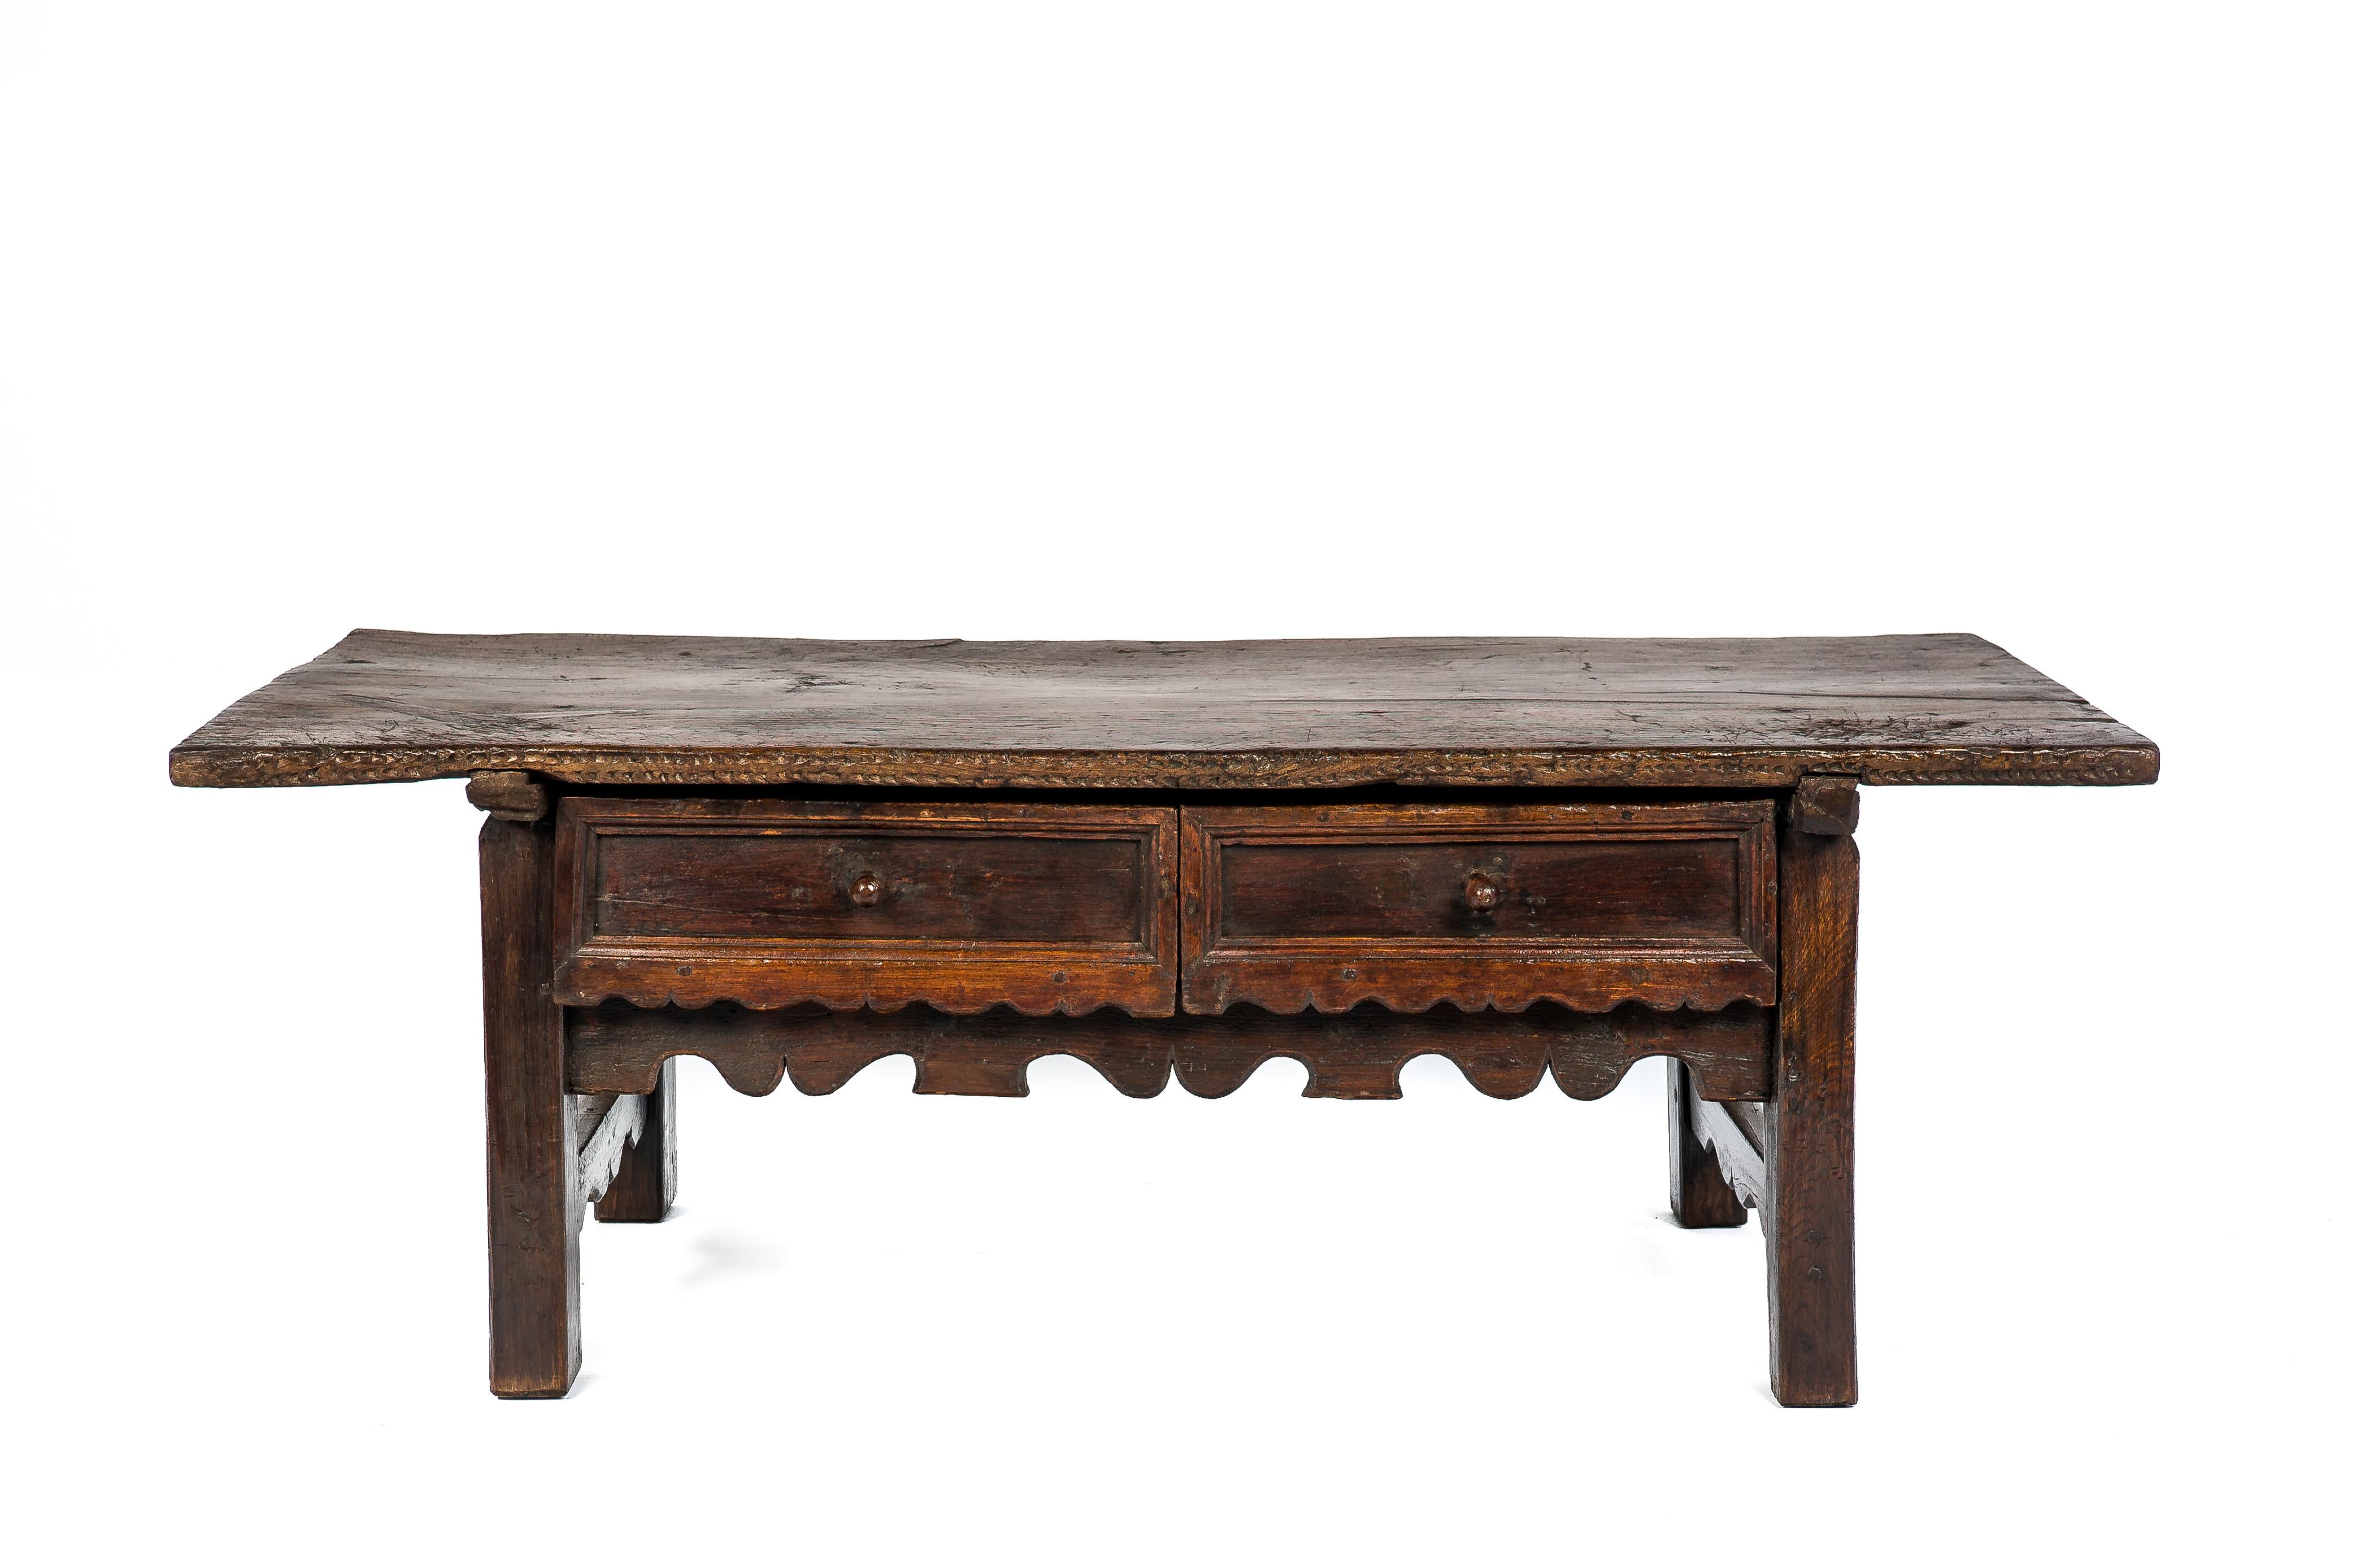 This beautiful table was made in Spain in the early 18th century. It was completely made in solid chestnut. The top was made from one piece of wood and displays an intricate grain pattern. The top was joined to the base by a dovetail joint. The